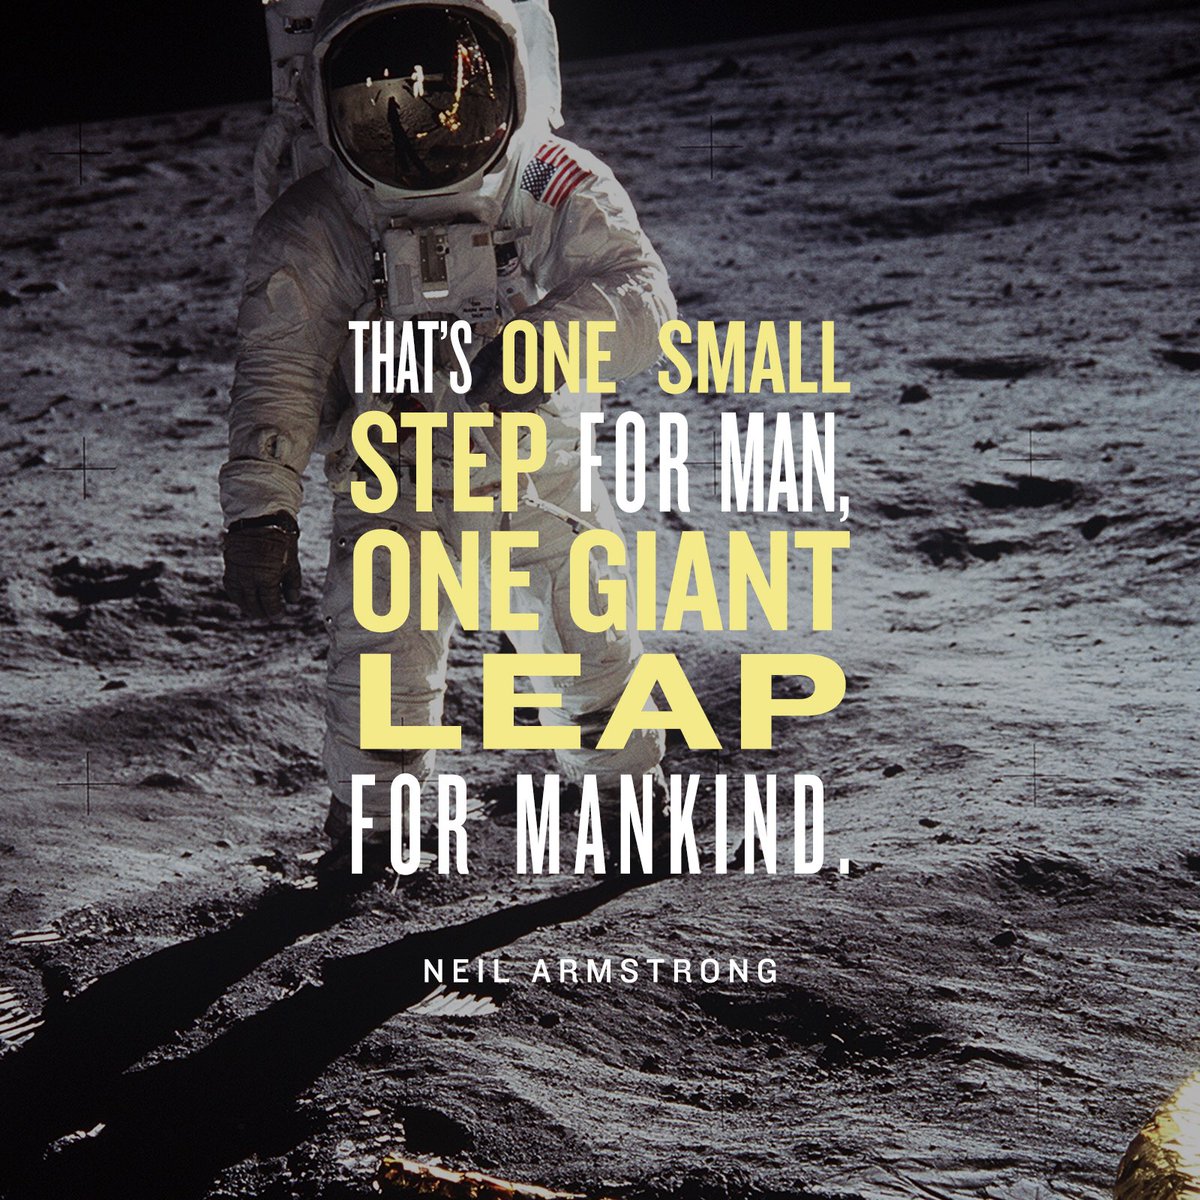 “One small step for man. One giant leap for mankind” – Veritas4u